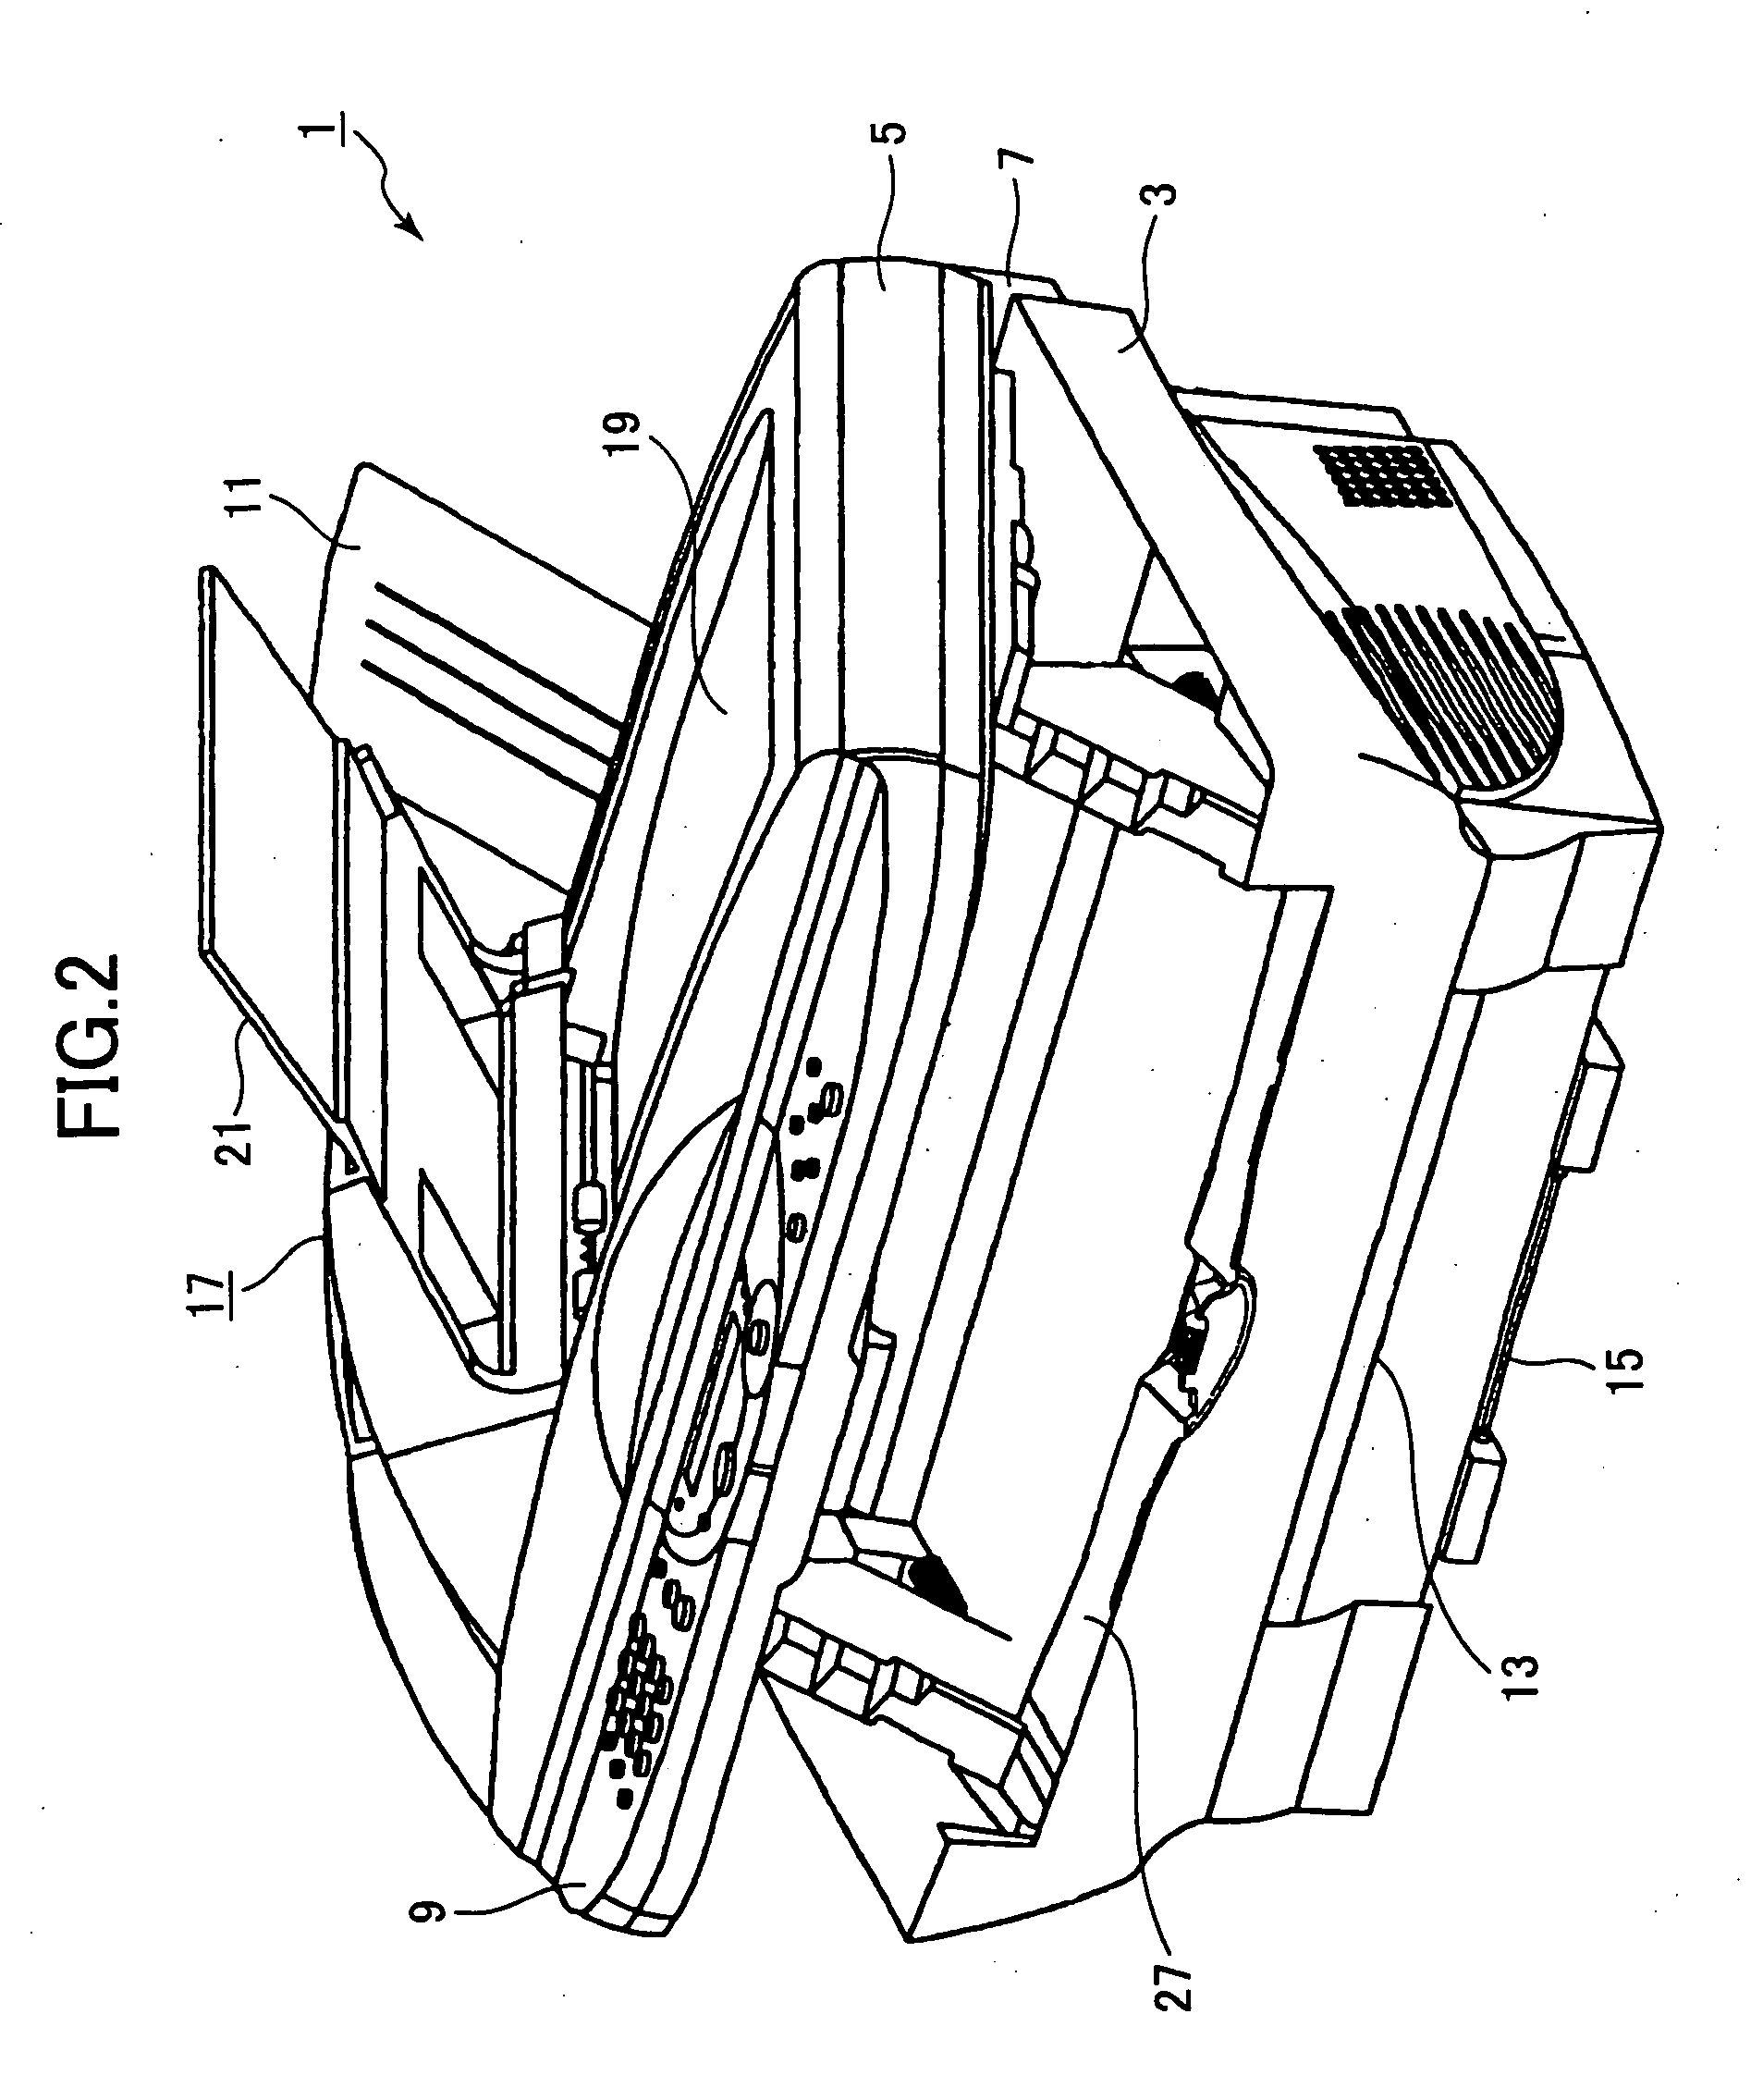 Image forming device including mechanism to lock cover